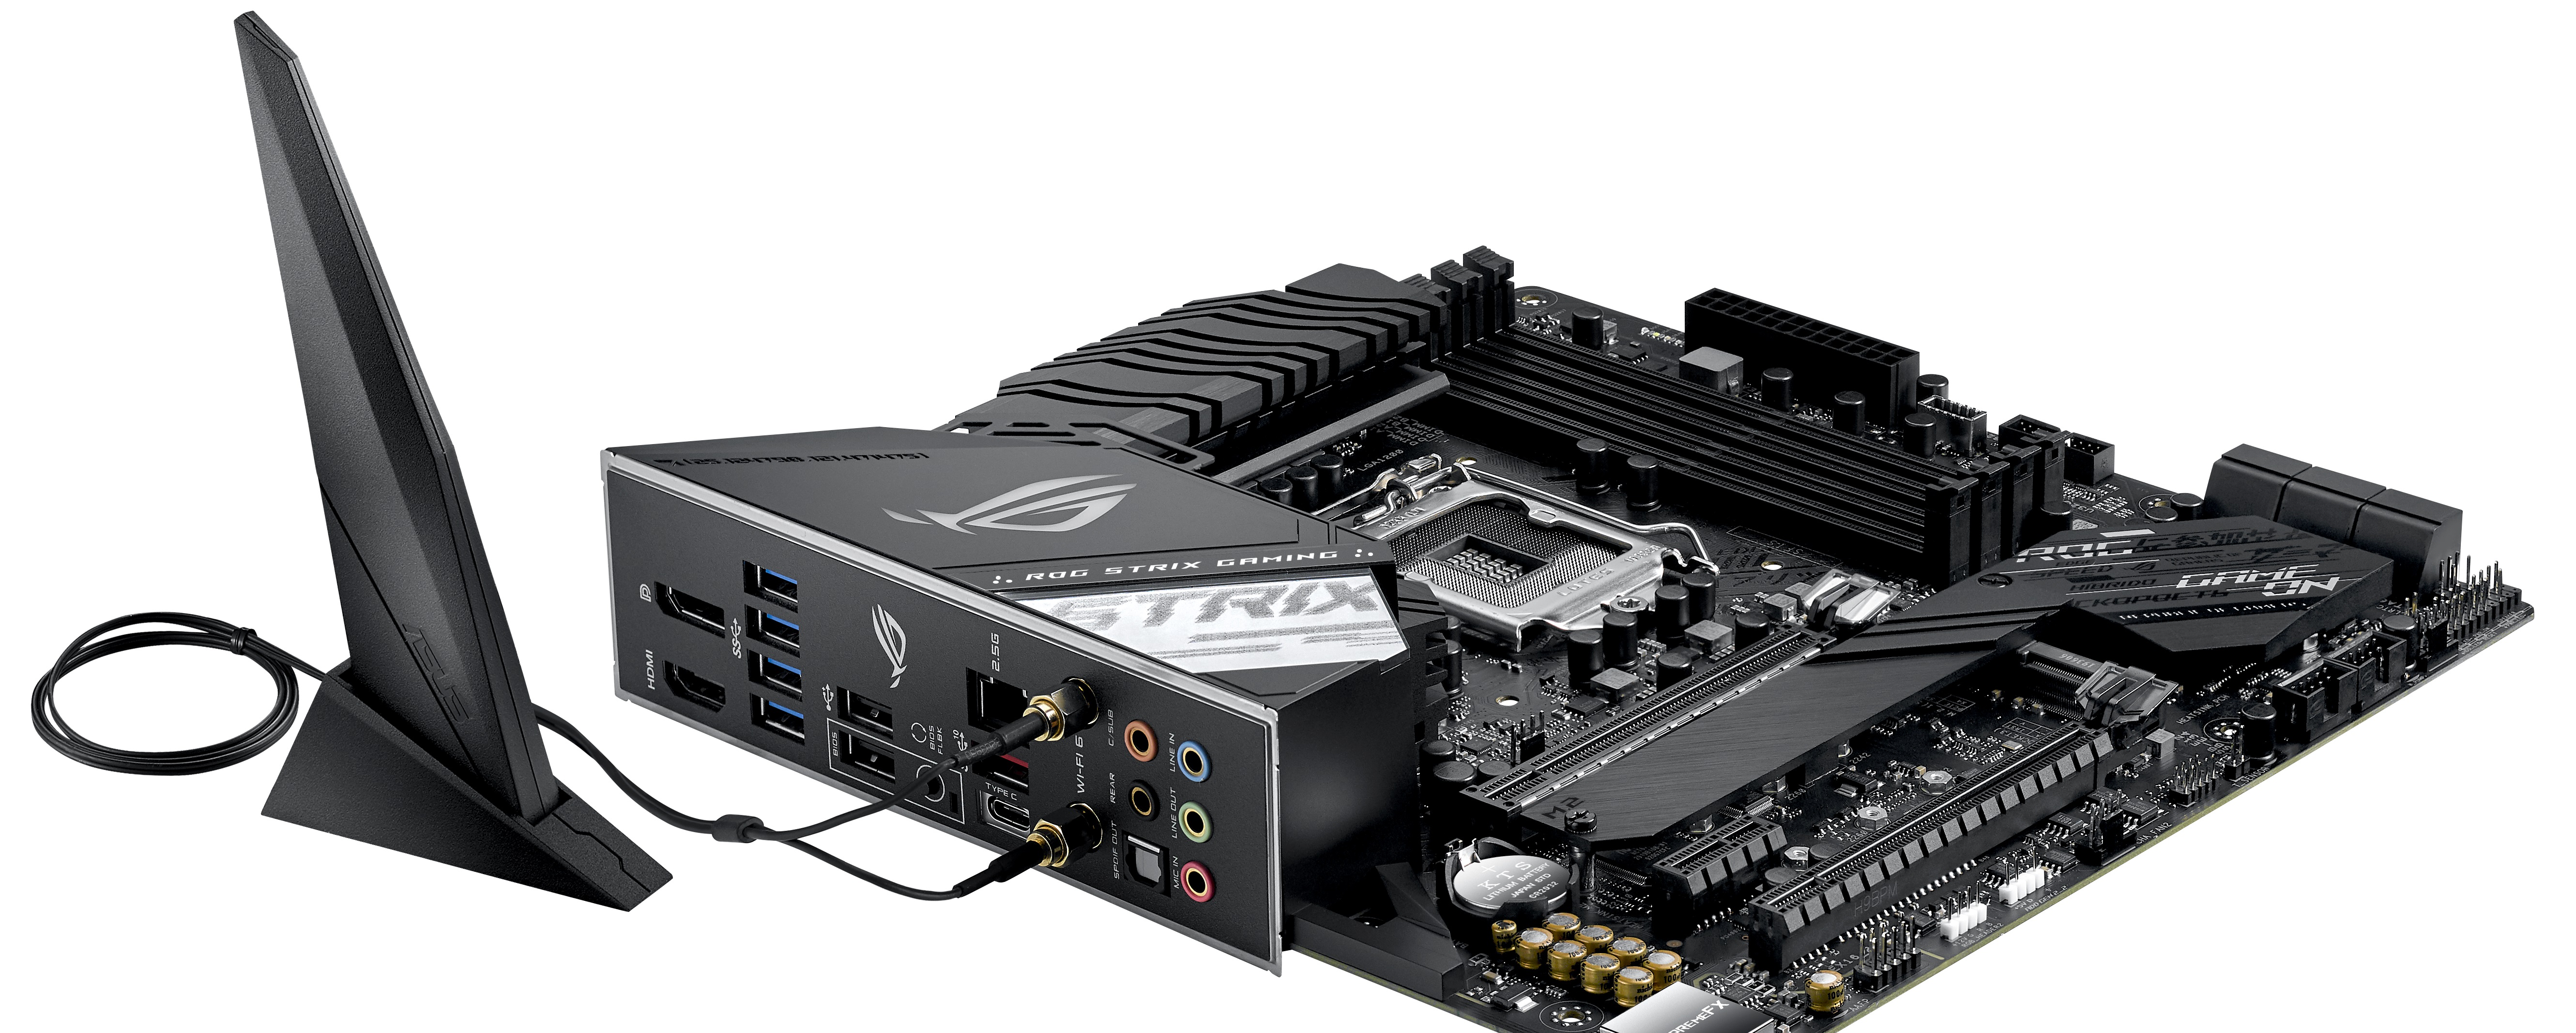 ASUS ROG Strix Z490-G Gaming Wi-Fi - The Intel Z490 Overview: 44+  Motherboards Examined